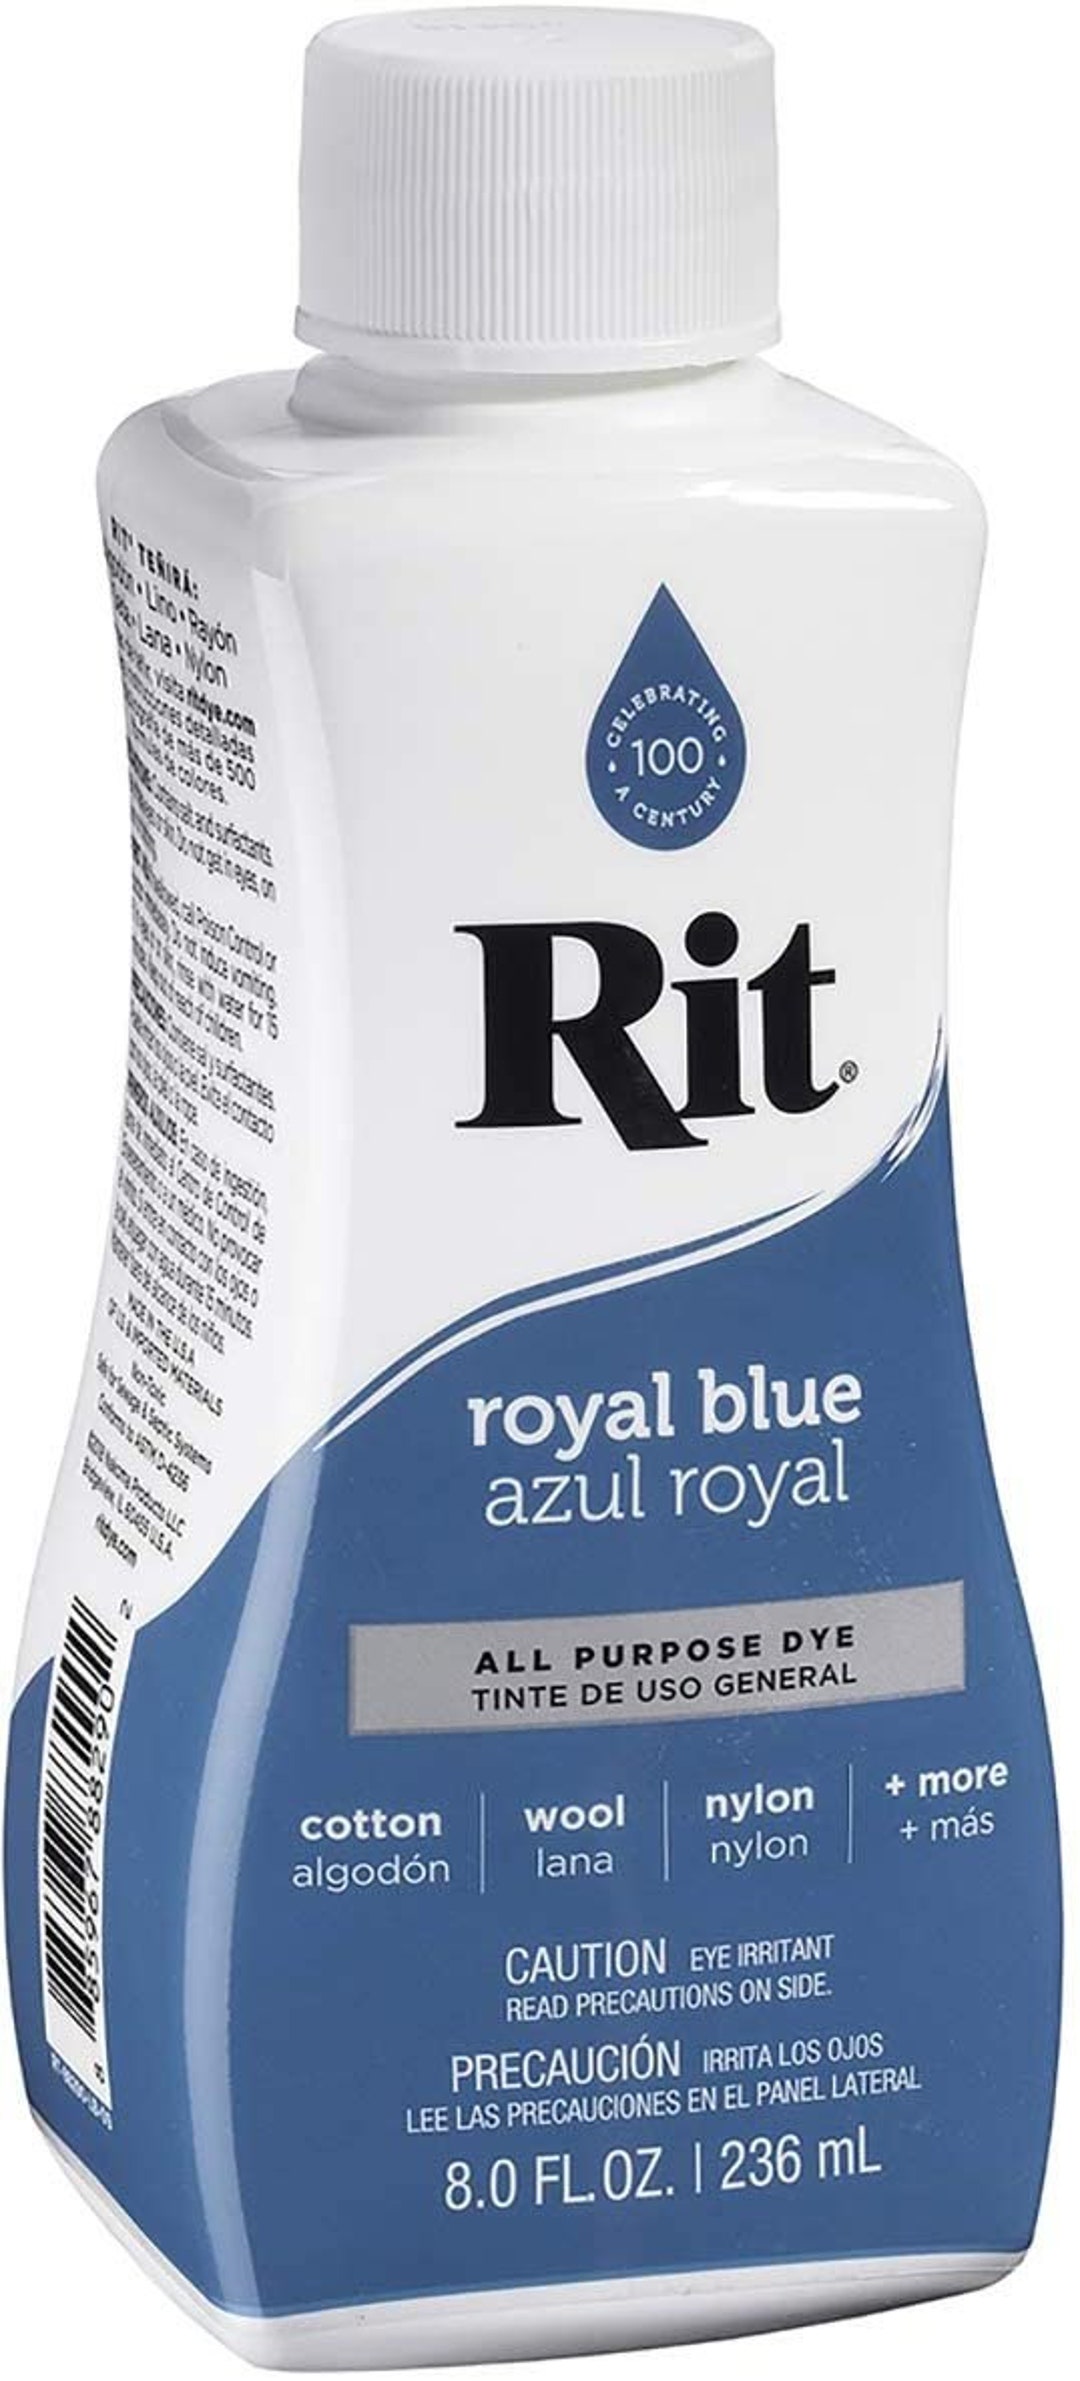 All-purpose Concentrated Fabric Rit Dye Powder Available in